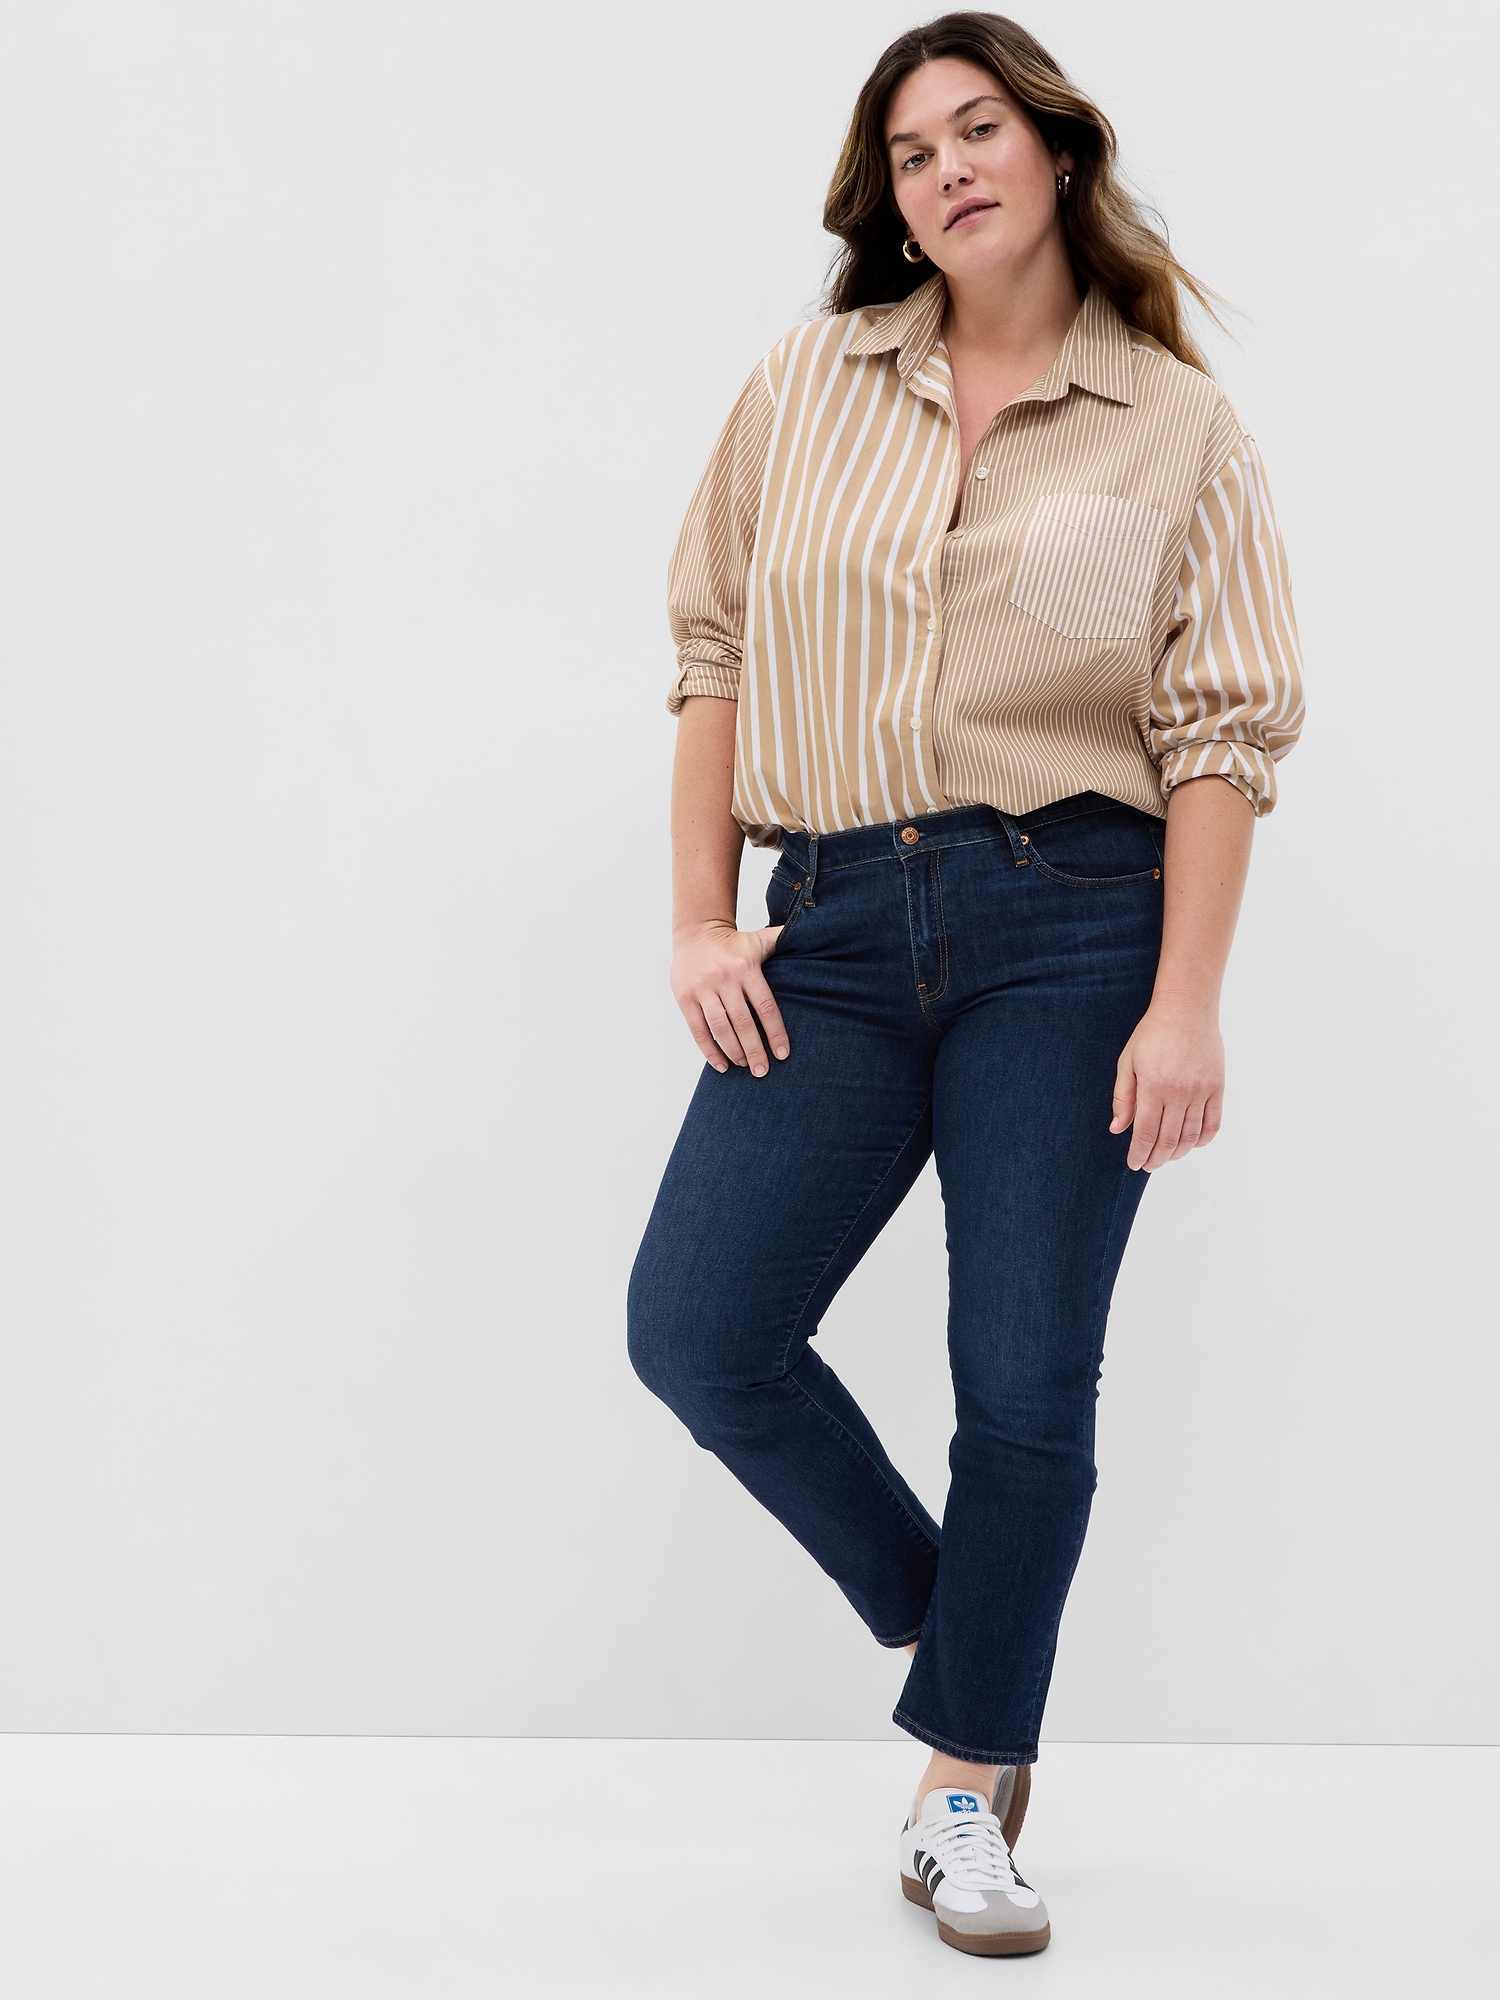 Best Selling And Most Flattering GAP Jeans For Women Over 45! (All Under  $80) 